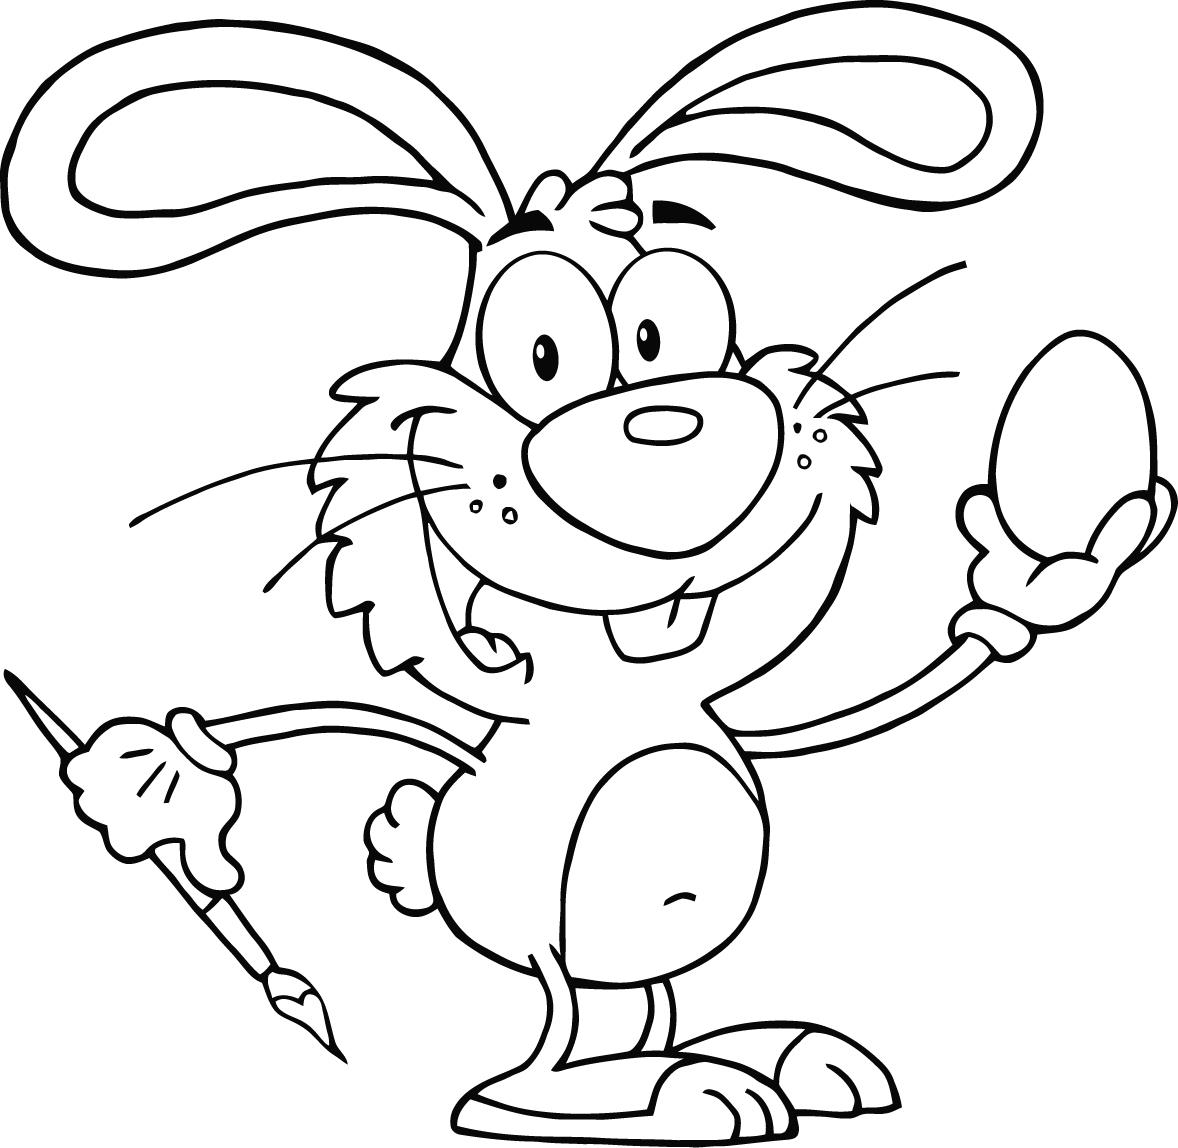  Bunny Coloring Pages 10